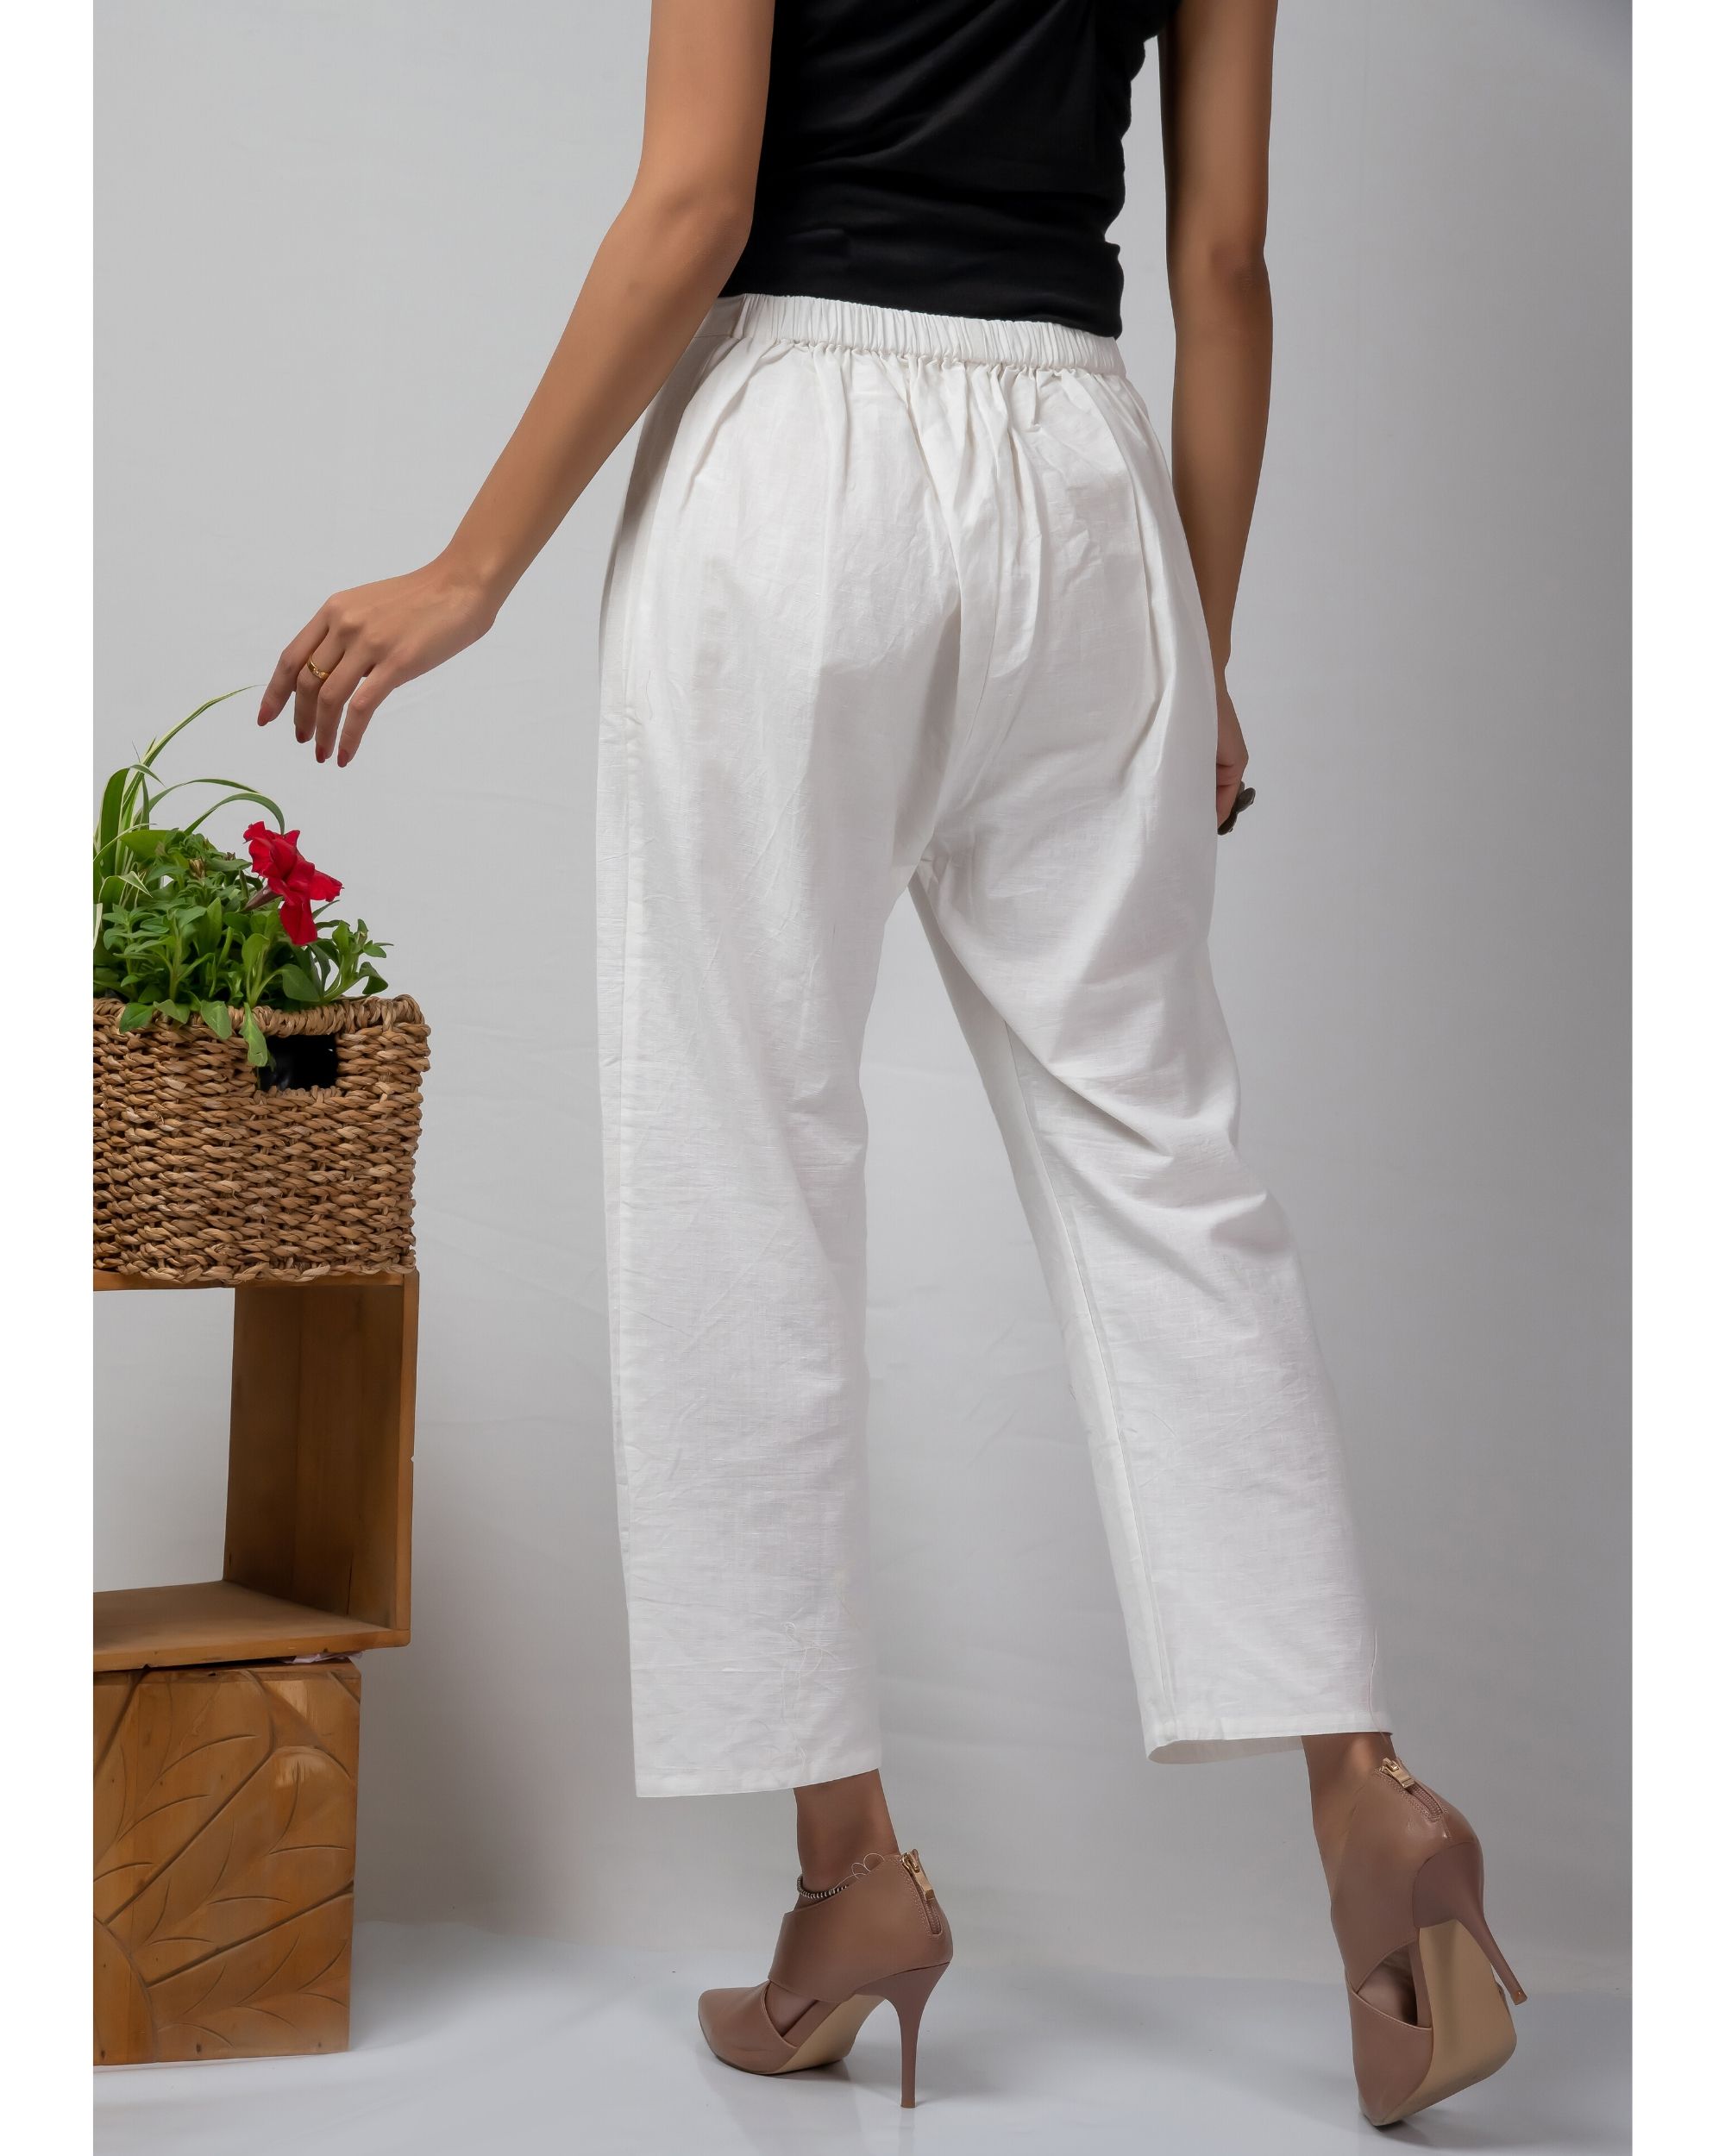 White straight cotton pants by Silai | The Secret Label